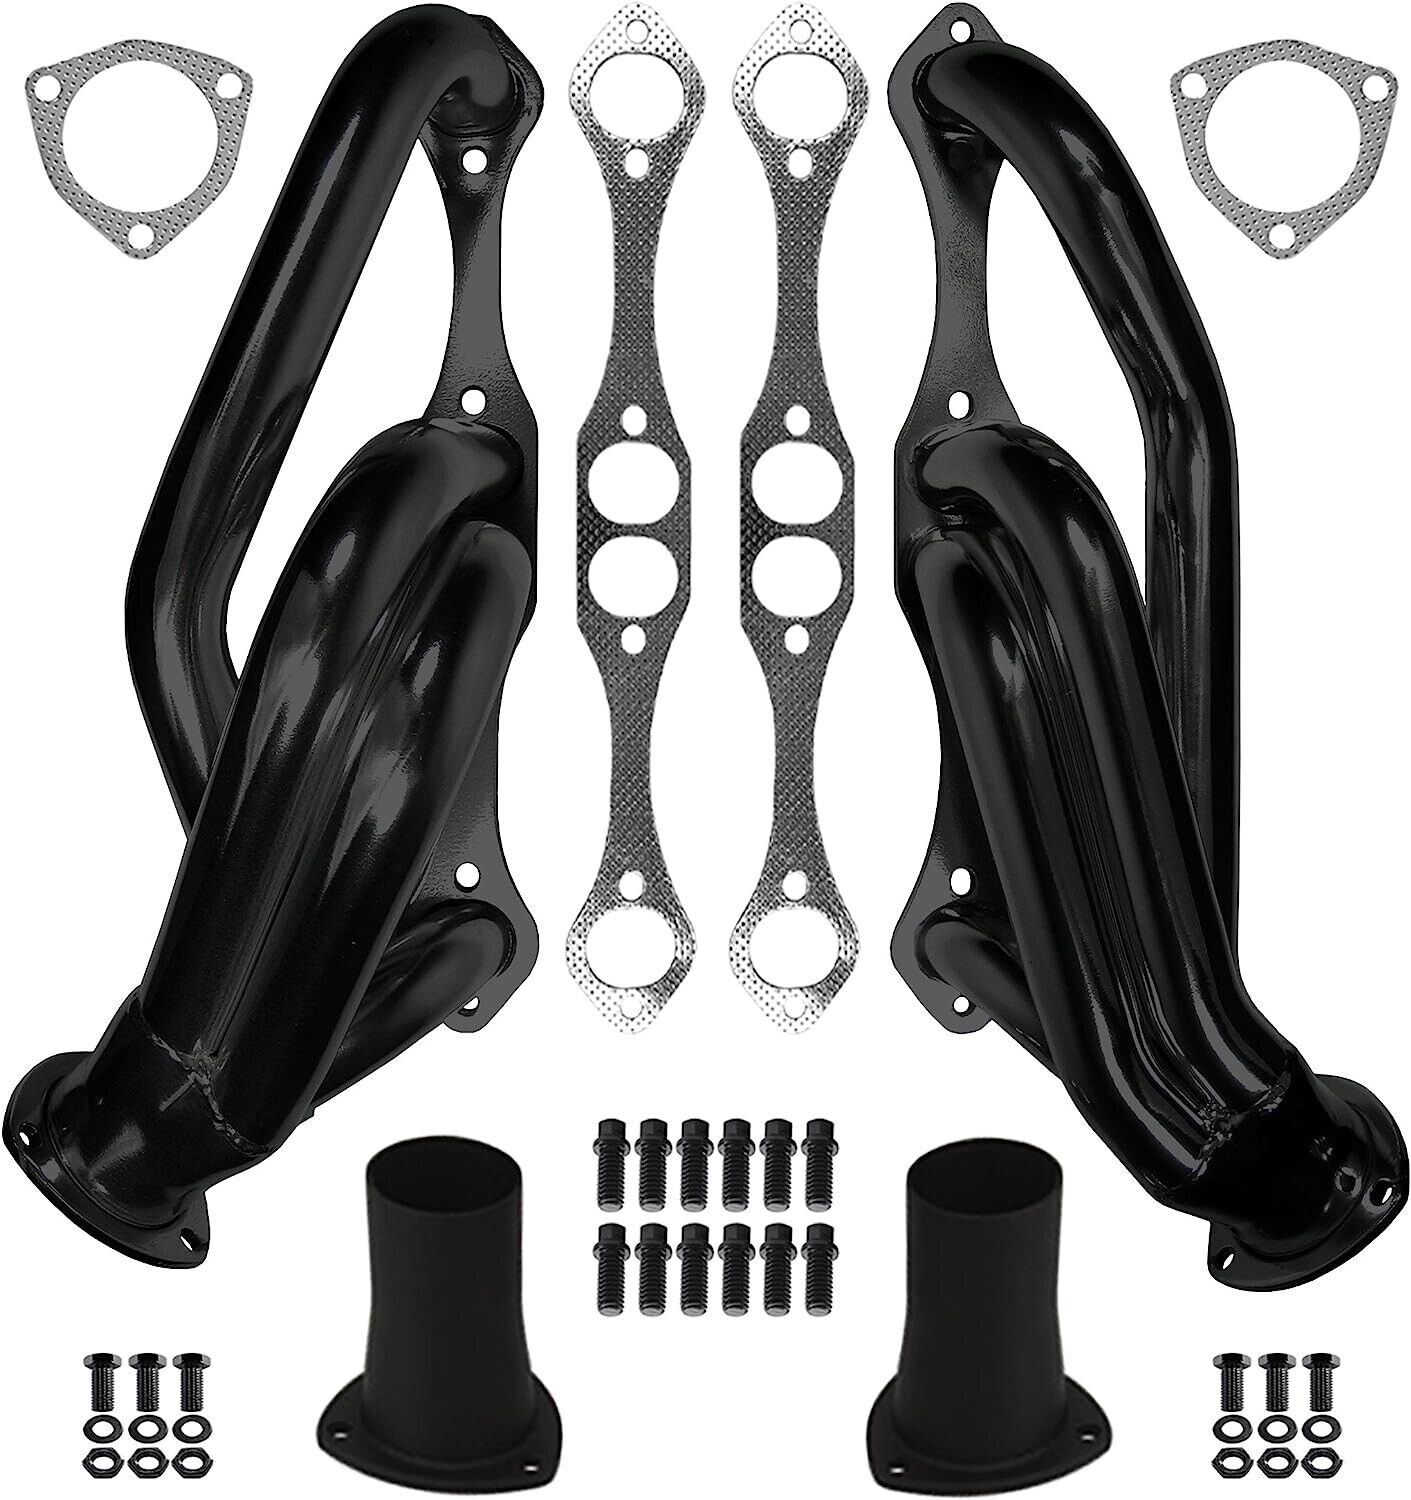 NEW 55-57 CHEVY CHASSIS HEADERS FOR RACK & PINION,SBC 262-400,BLACK PAINT,TRI5